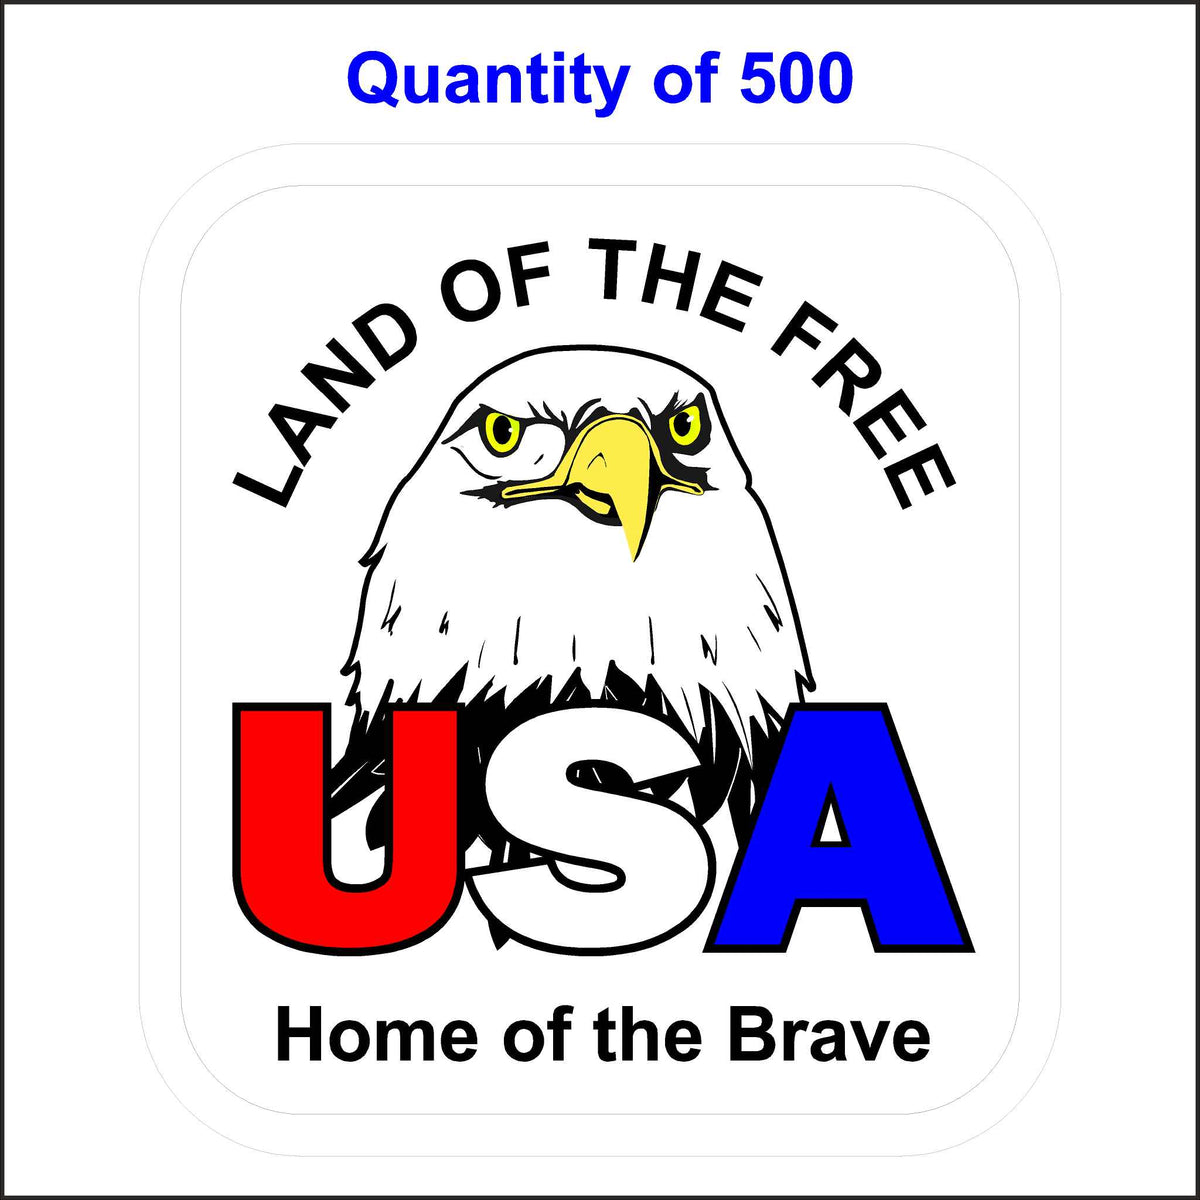 USA Land of the Free Home of the Brave Patriotic Sticker. This Sticker Has and Eagle and in Printed in Red, White, and Blue. 500 Quantity.